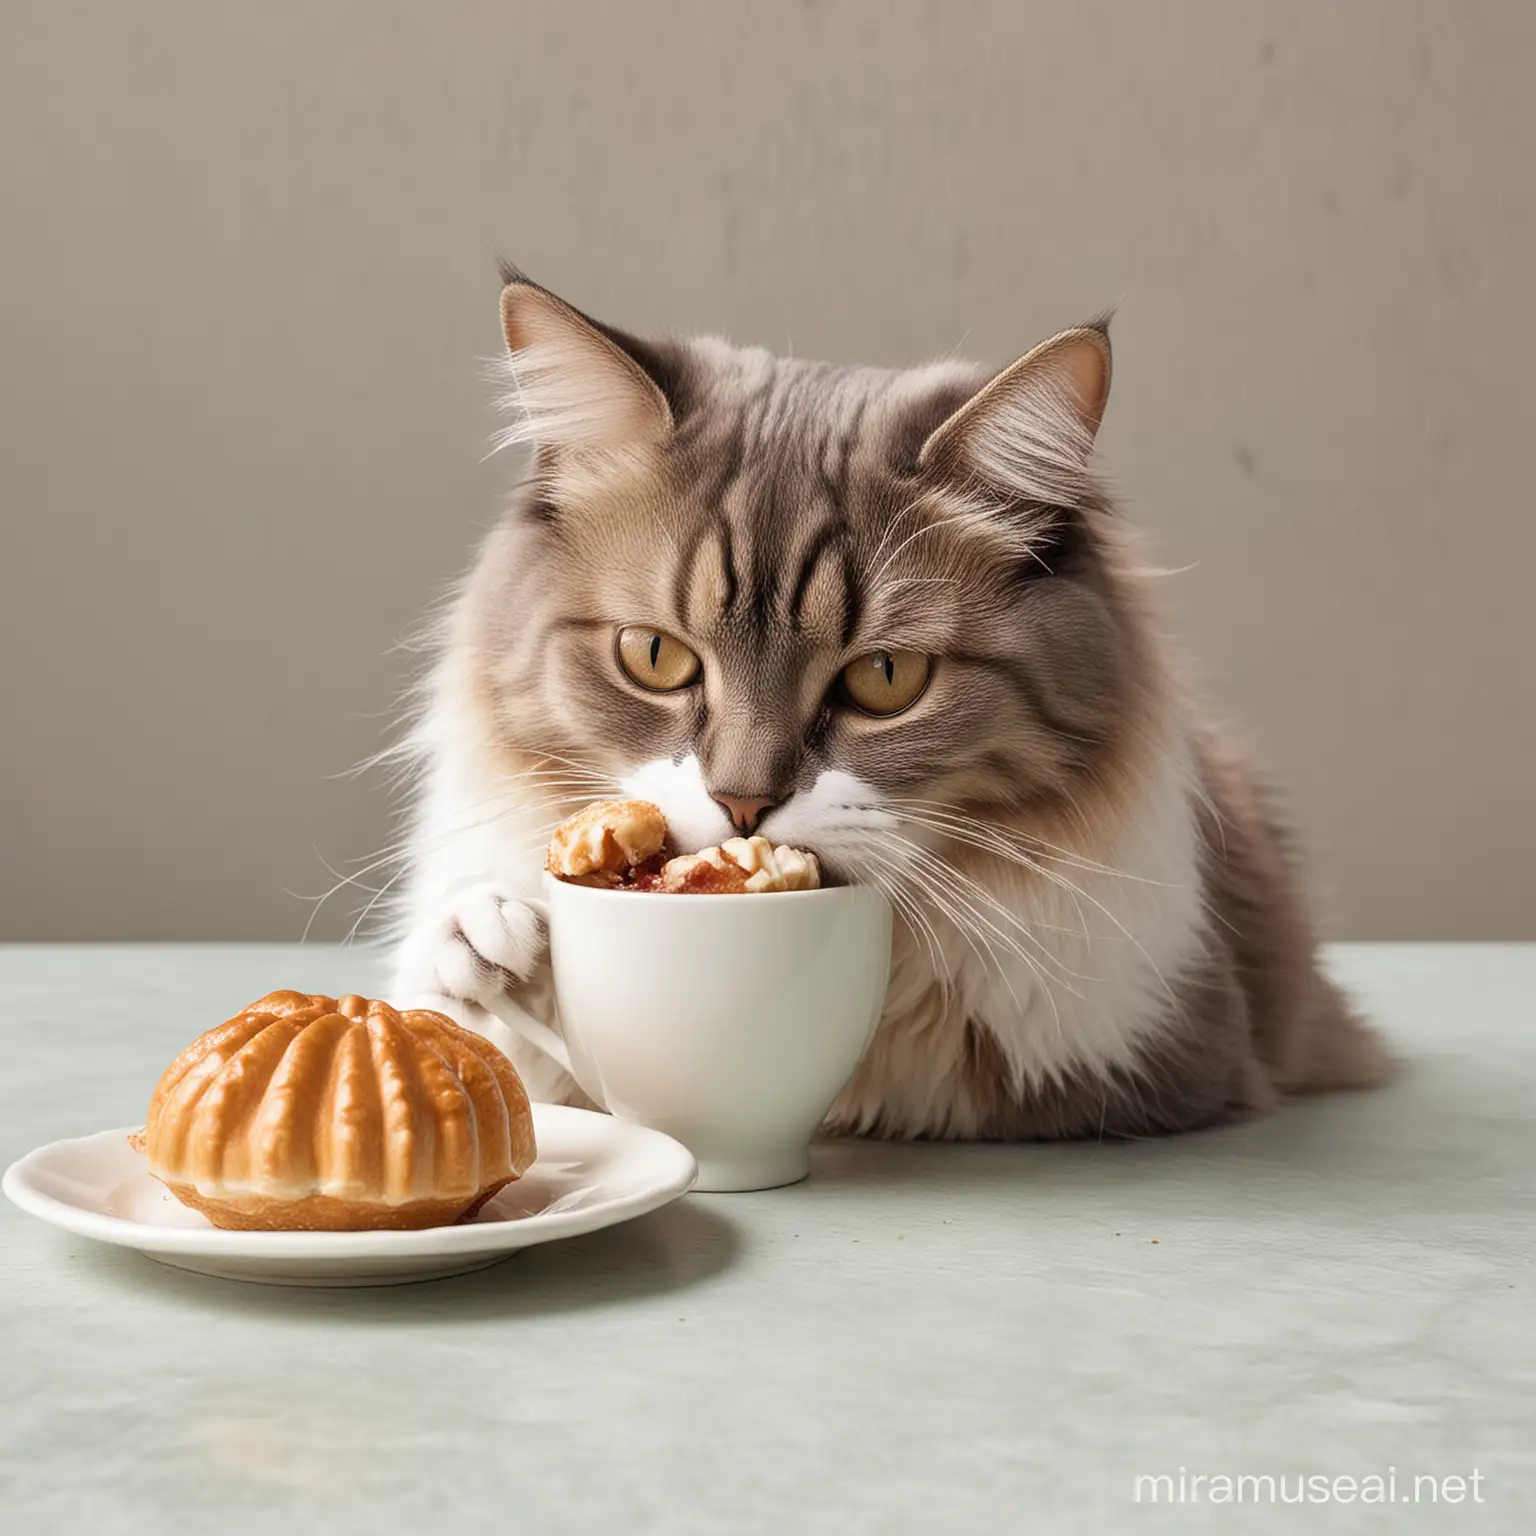 Cat Enjoying a Concha Pastry with a Cup of Coffee